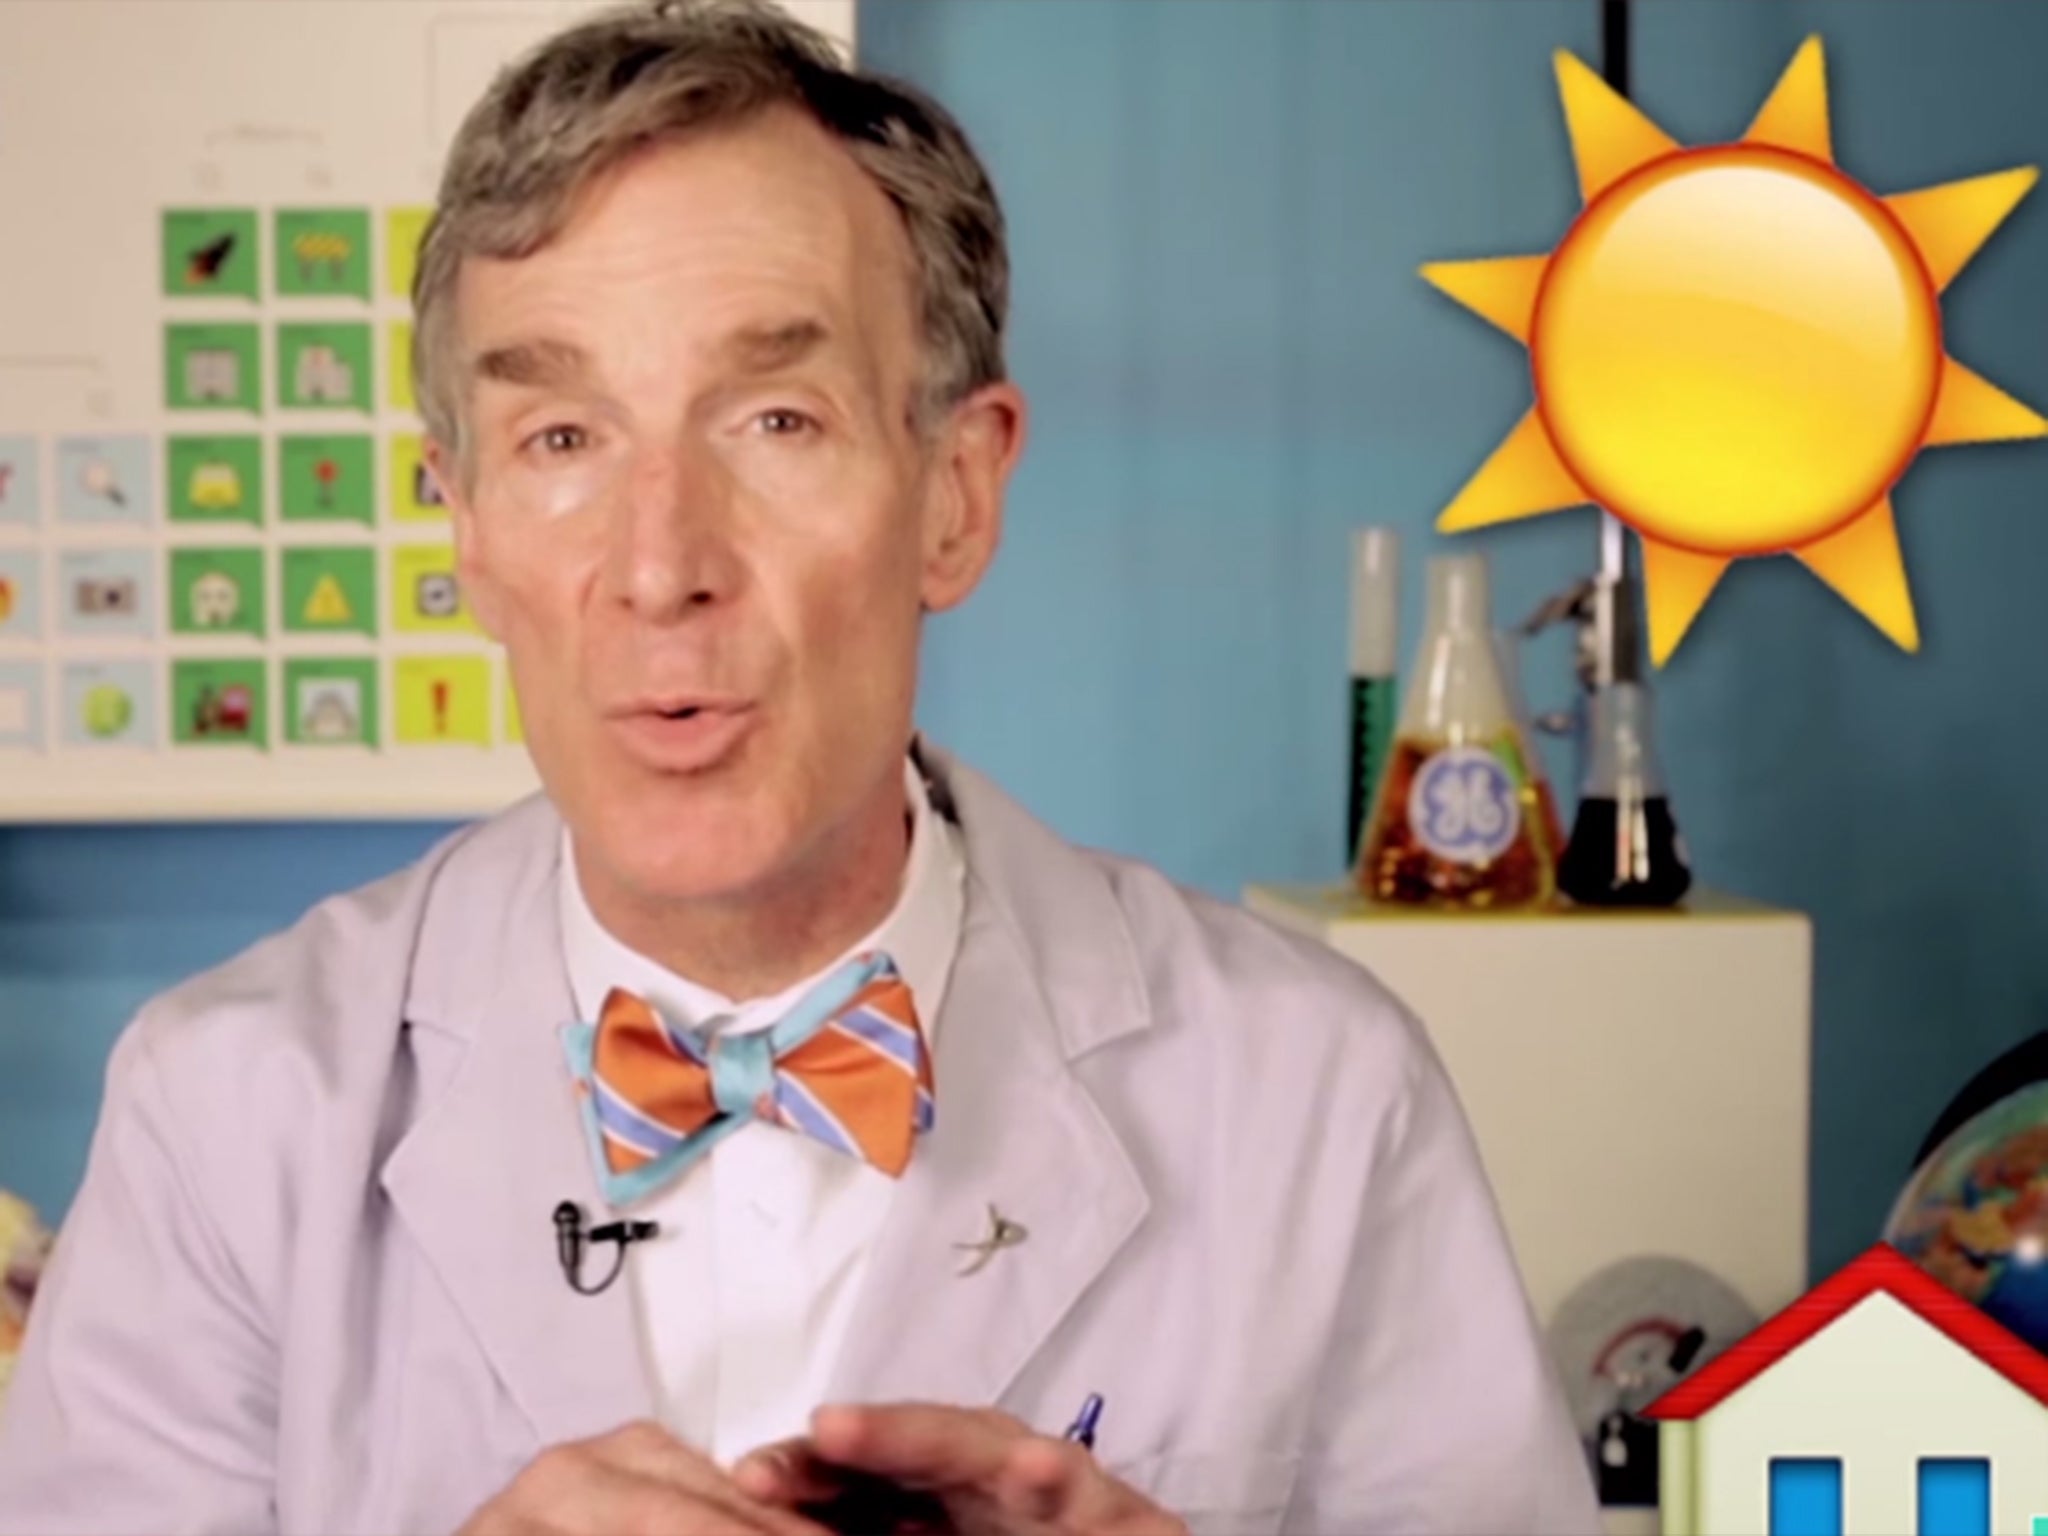 bill-nye-explains-climate-change-with-emoji-because-people-still-don-t-get-it-the-independent